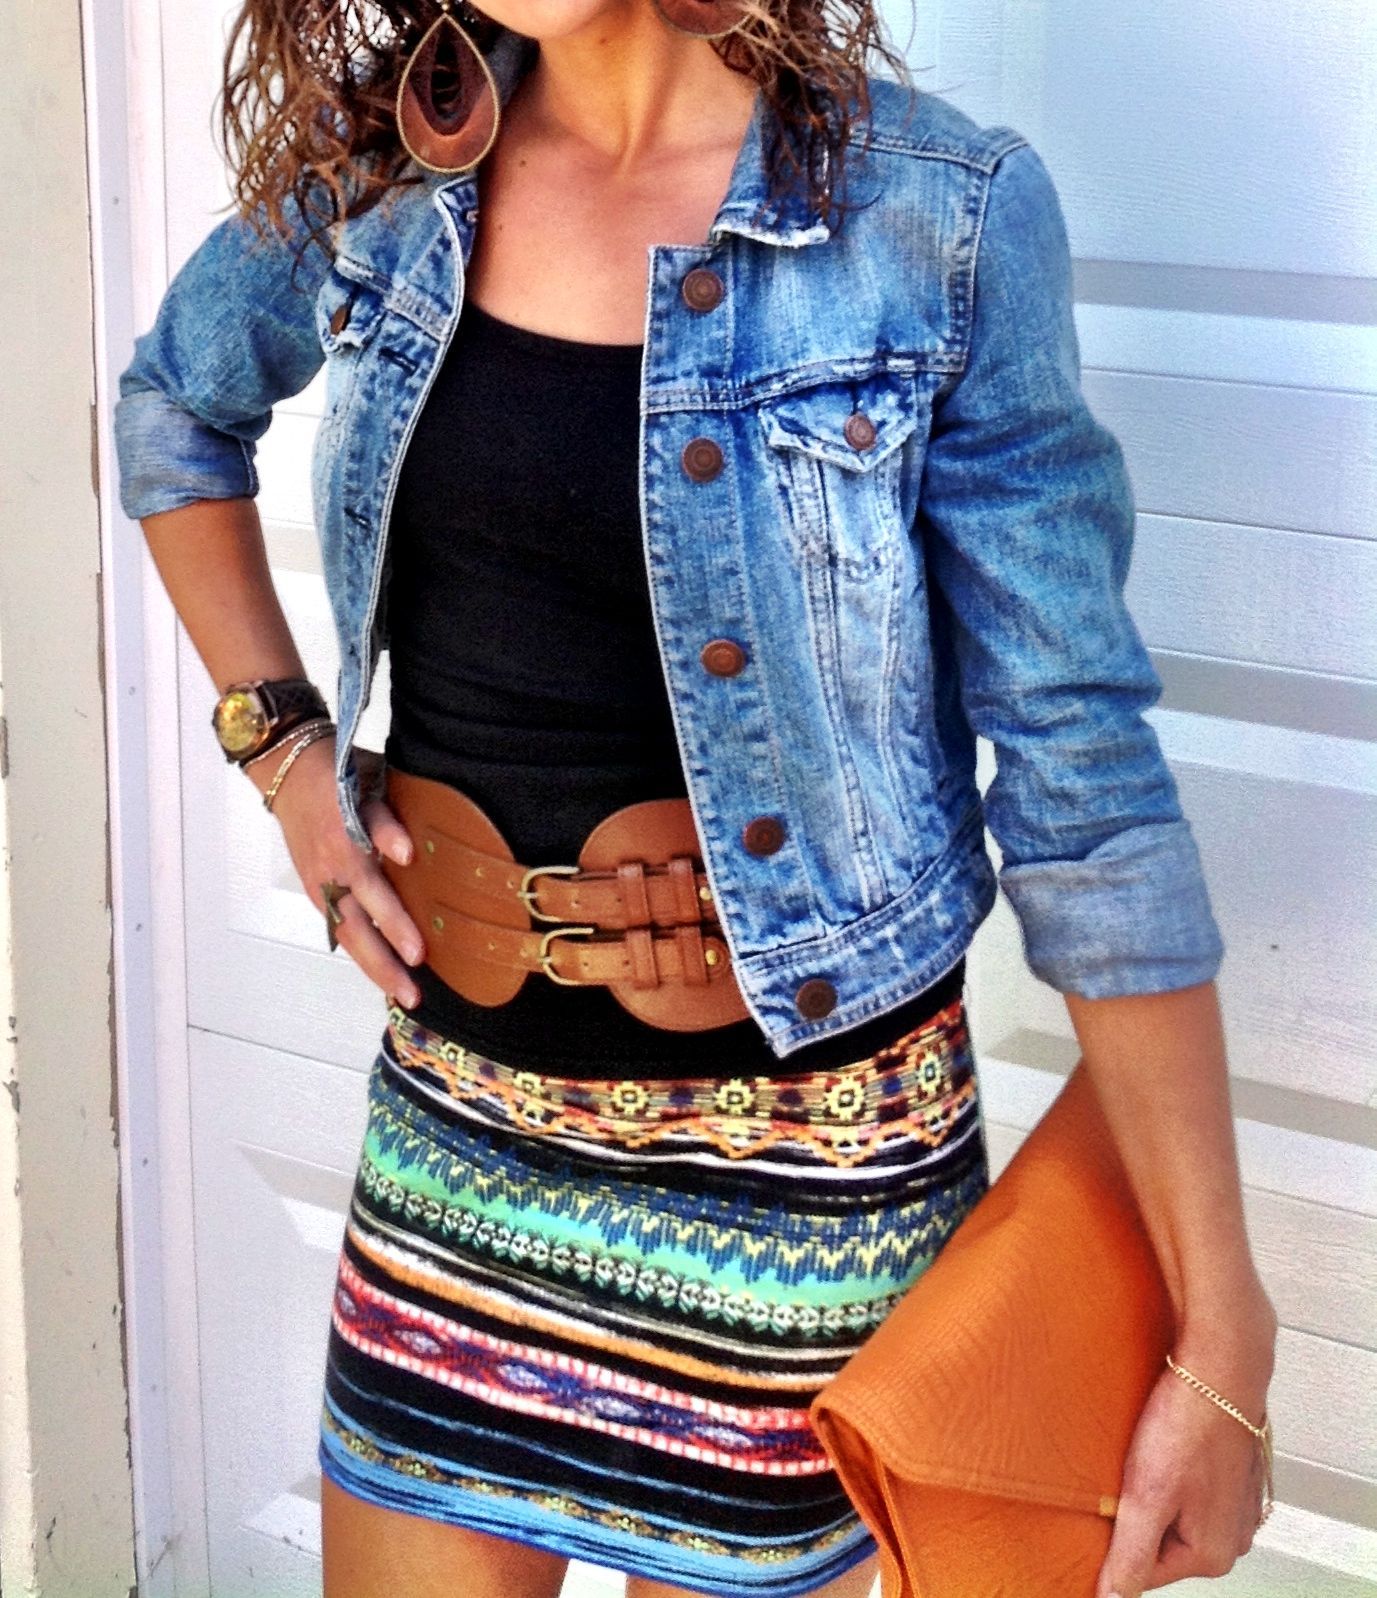 From the Aztec print skirt – oversized double buckle belt- simple tank- distress